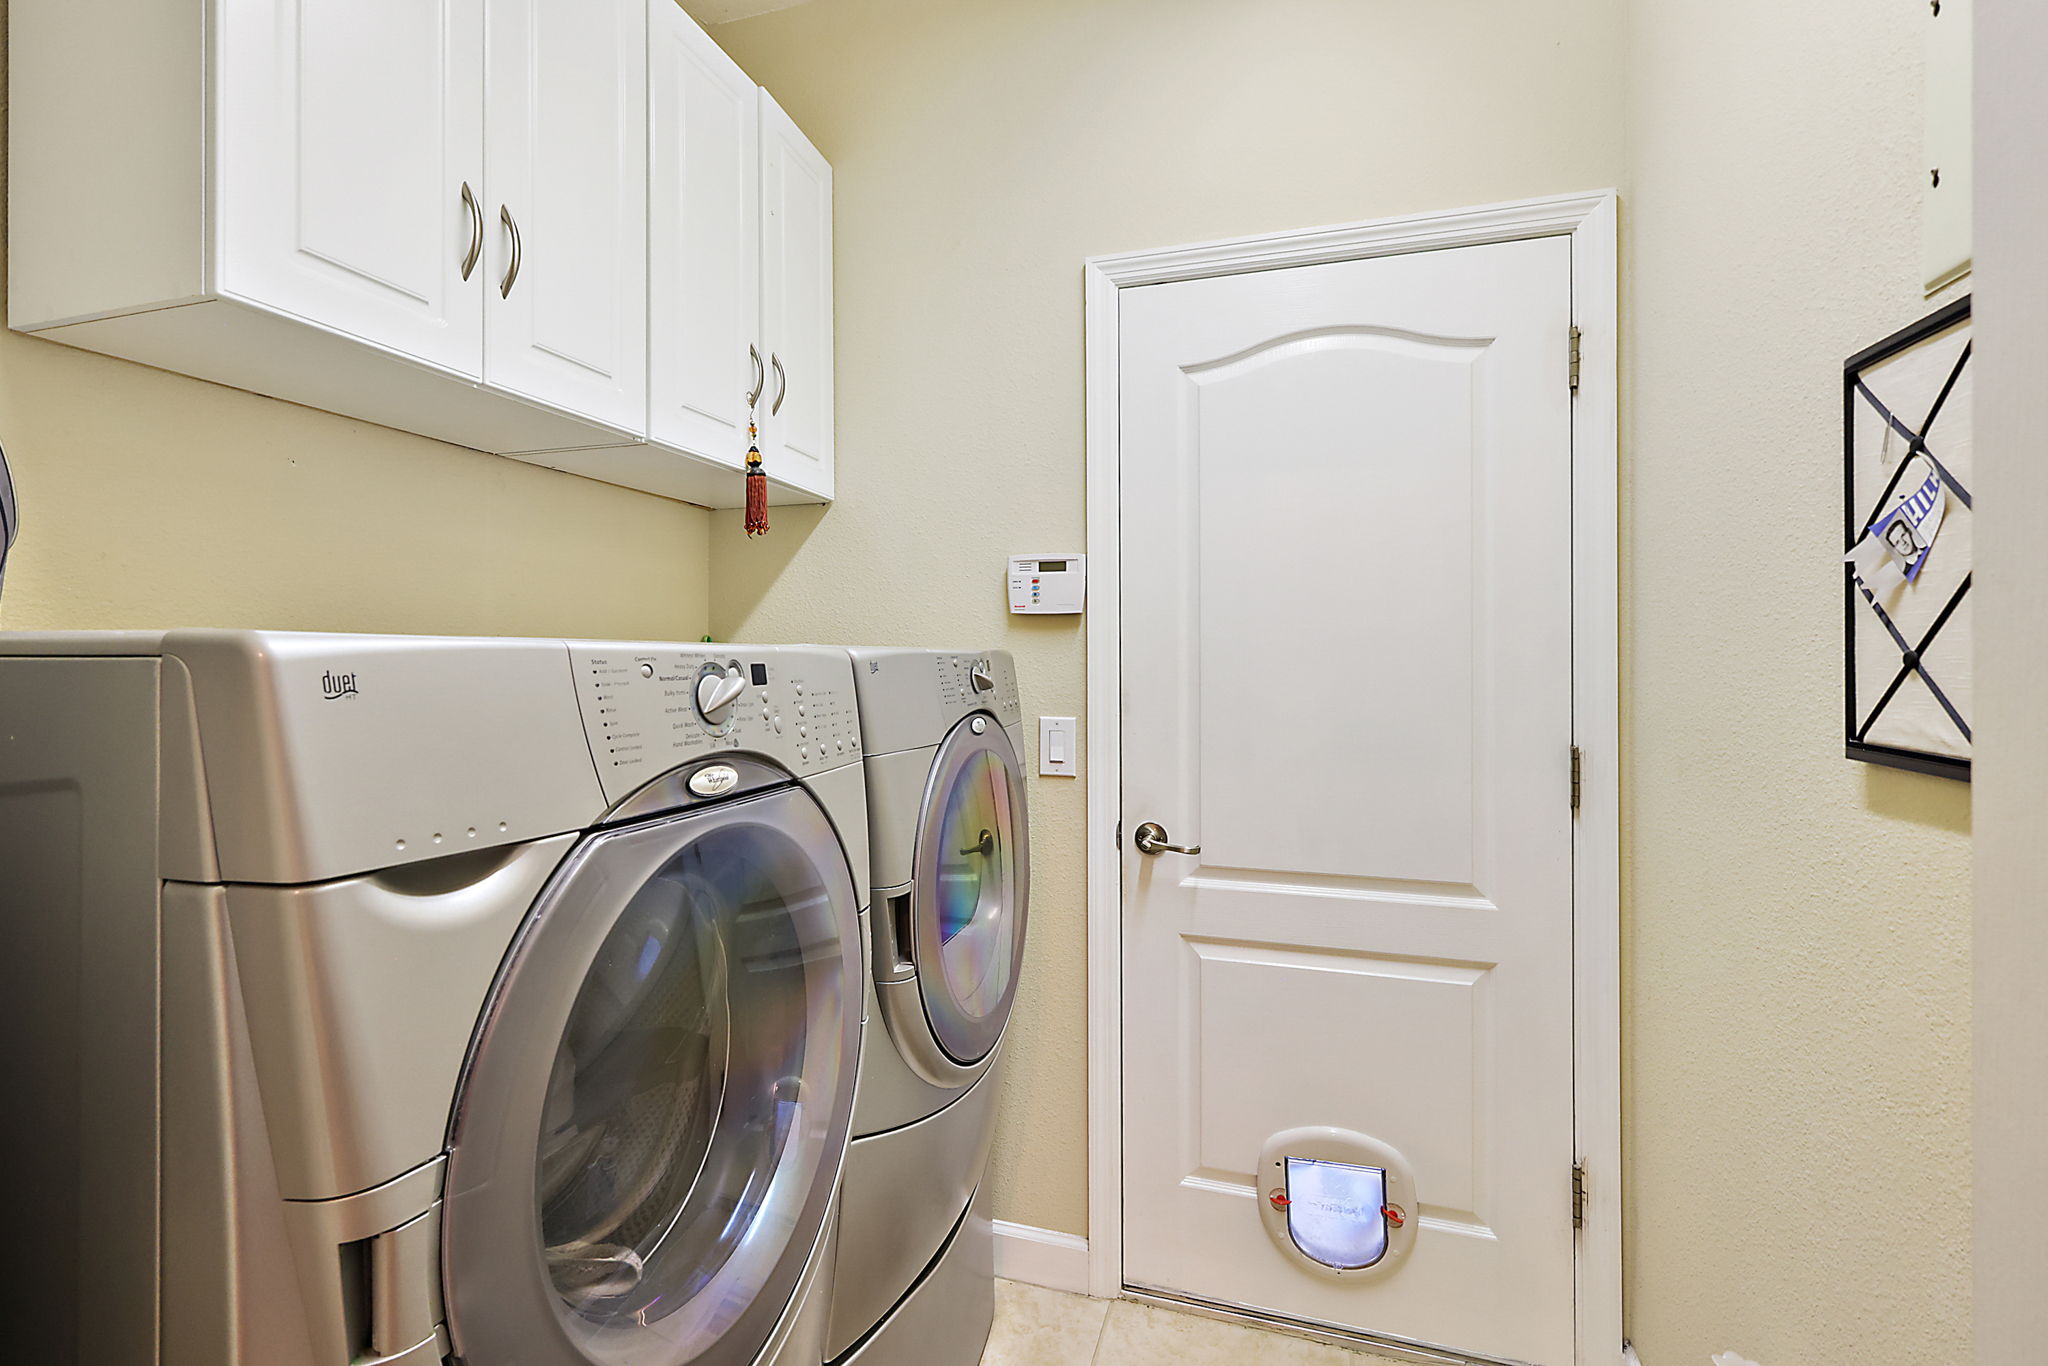 Seller will negotiate a washer and dryer